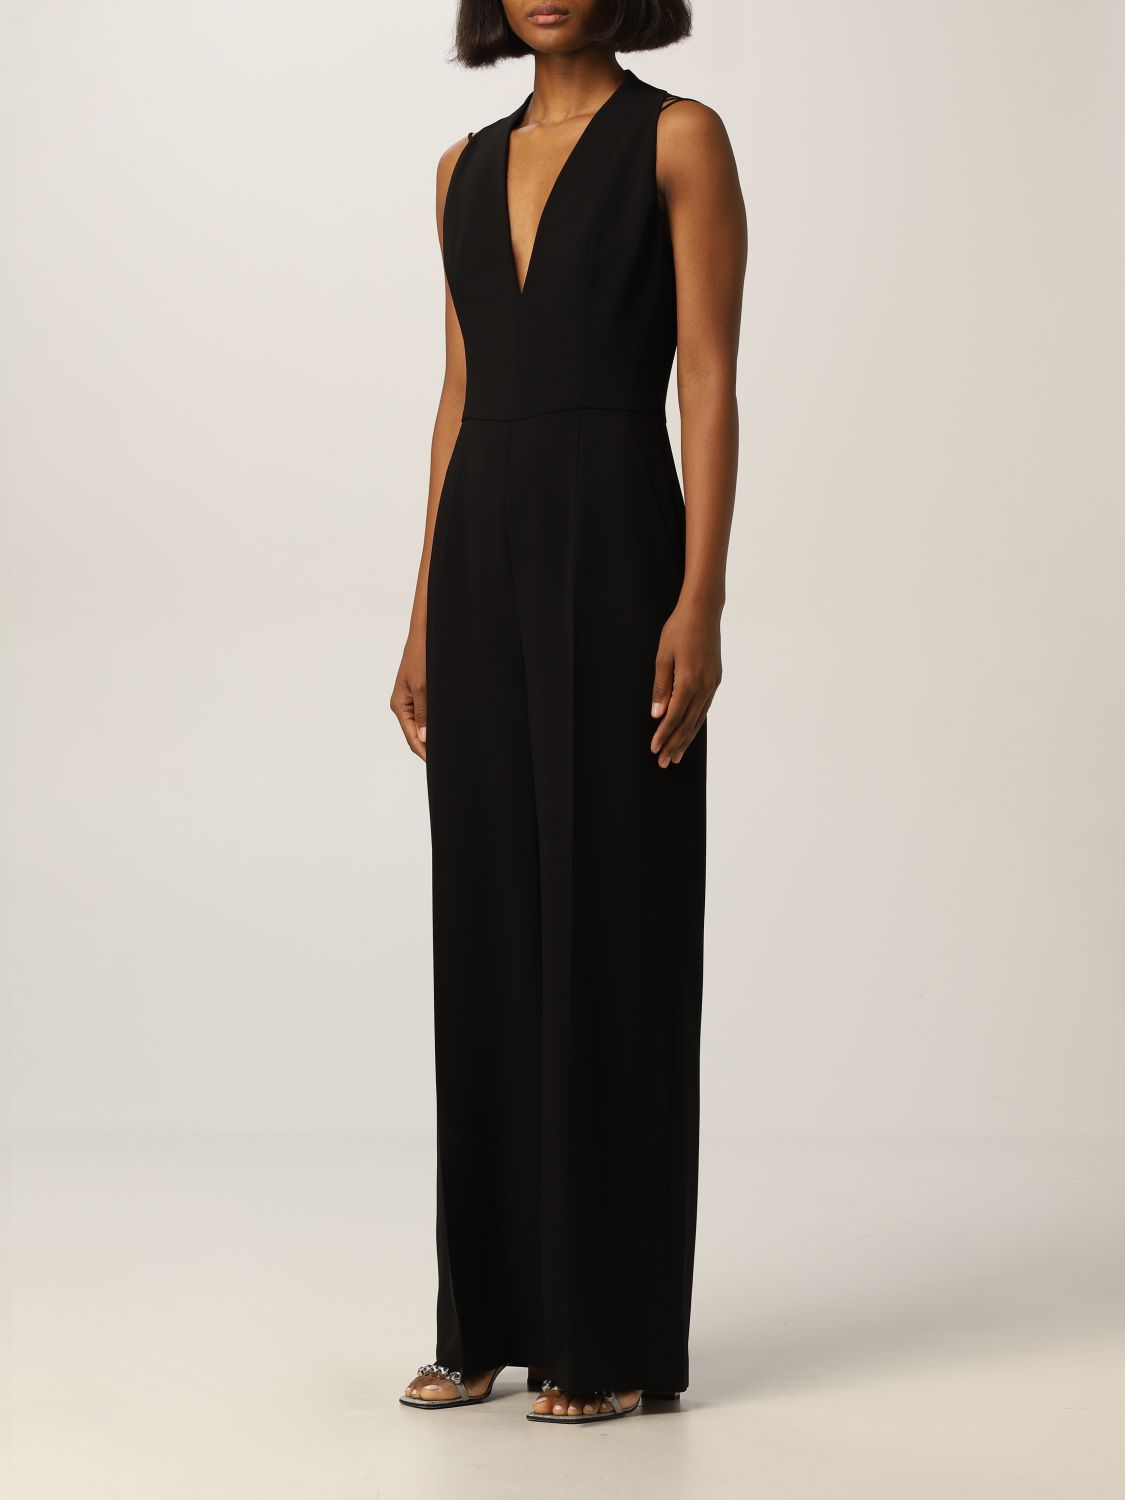 Alberta Ferretti Jumpsuit in Black Womens Clothing Jumpsuits and rompers Full-length jumpsuits and rompers 